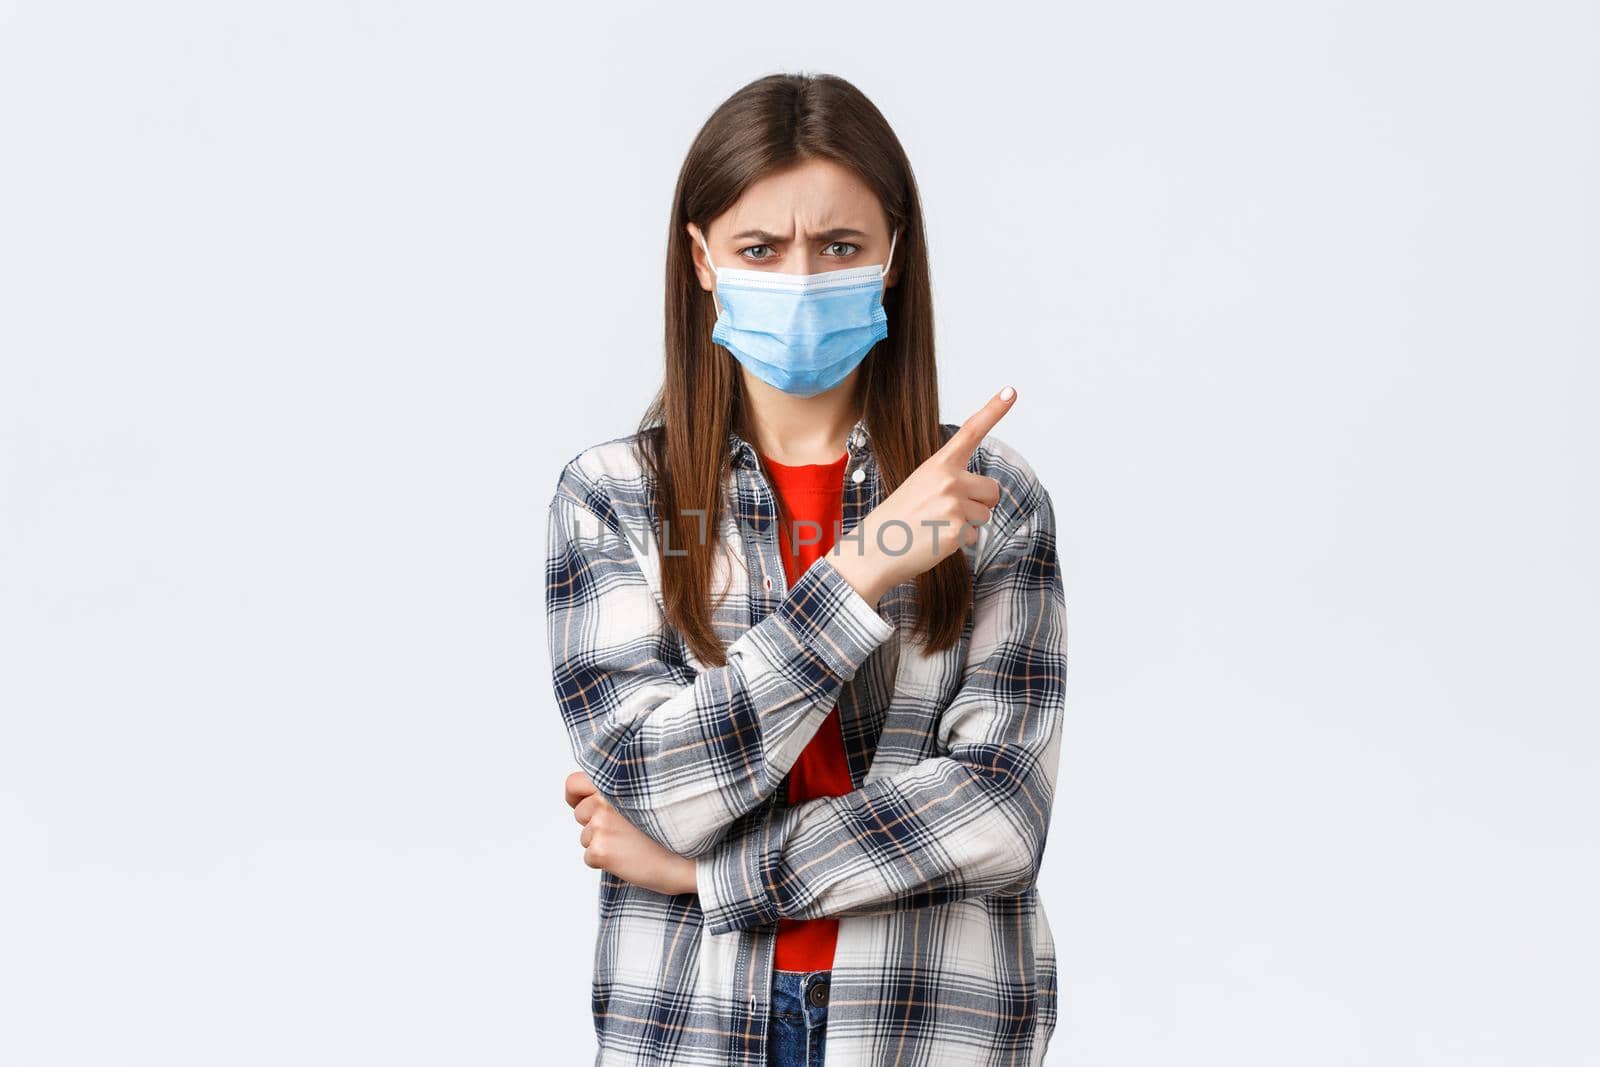 Coronavirus outbreak, leisure on quarantine, social distancing and emotions concept. Angry and disappointed, confused young woman pointing finger upper right corner frowning upset, wear mask.